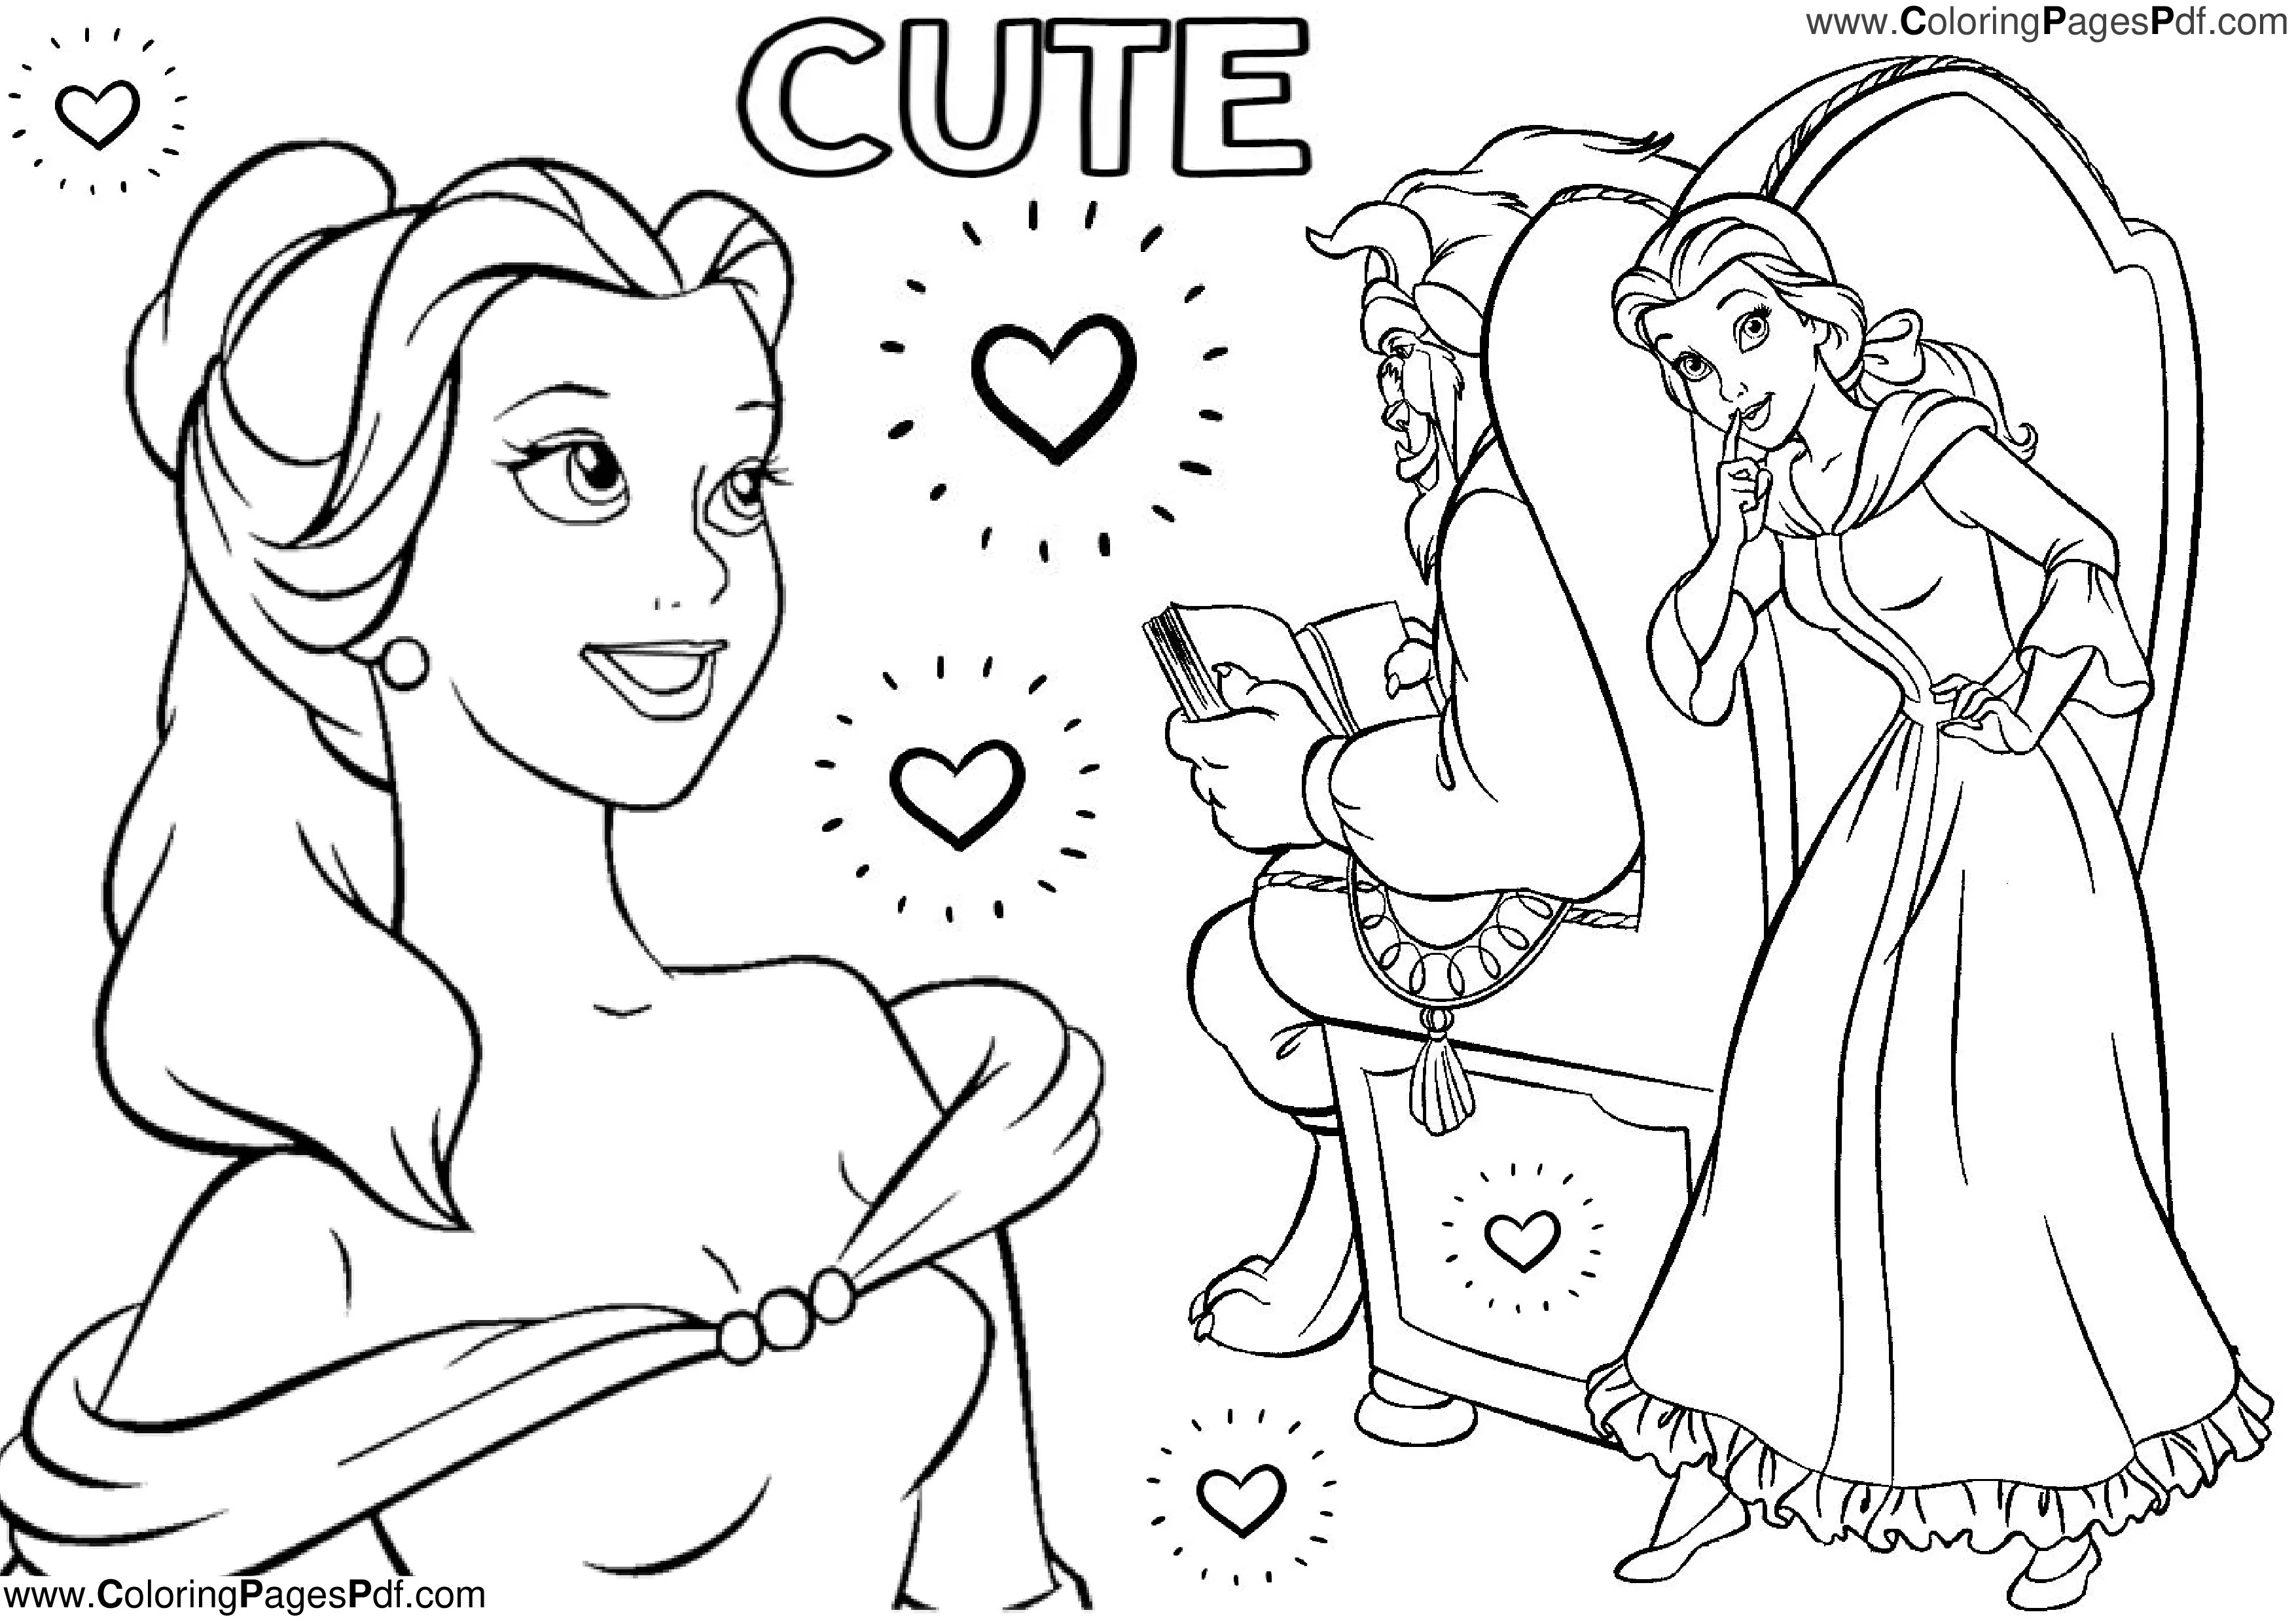 pretty color pages,beauty and the beast coloring book,beauty and the beast coloring pages free,belle coloring pages,disney princess coloring pages,princess coloring sheets,cinderella coloring pages,princess coloring pages online,free princess coloring sheets,cinderella coloring pages free,free printable princess coloring pages,free princess coloring pages,disney princess coloring,free disney princess coloring pages,princess coloring pages printable